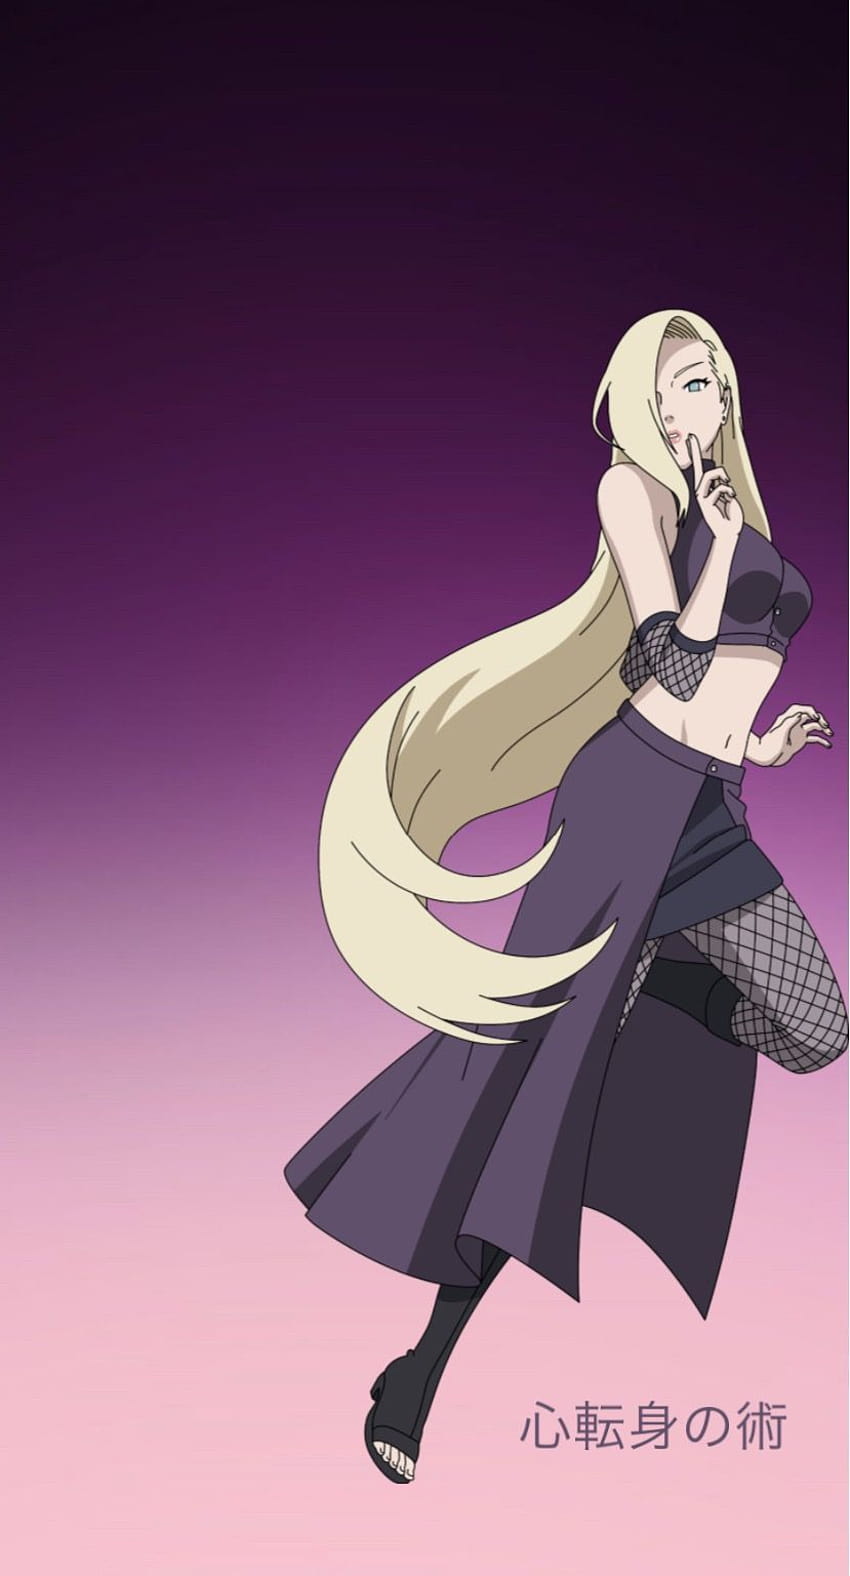 6 Ino Yamanaka Wallpapers for iPhone and Android by Tim Chan